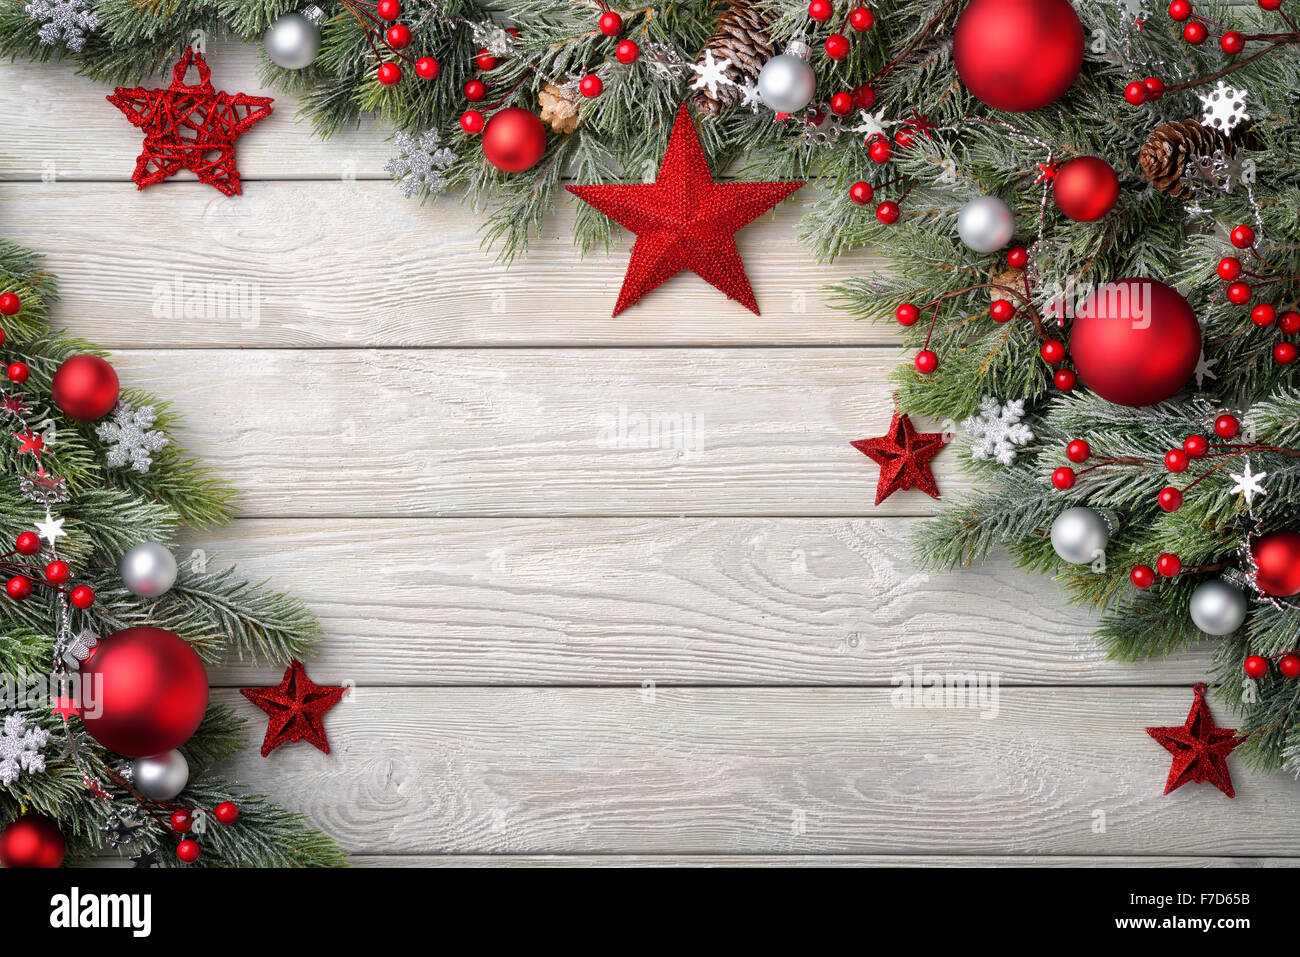 Christmas background with bright wooden board and fir branches decorated with red and silver baubles and stars - modern, simple Stock Photo